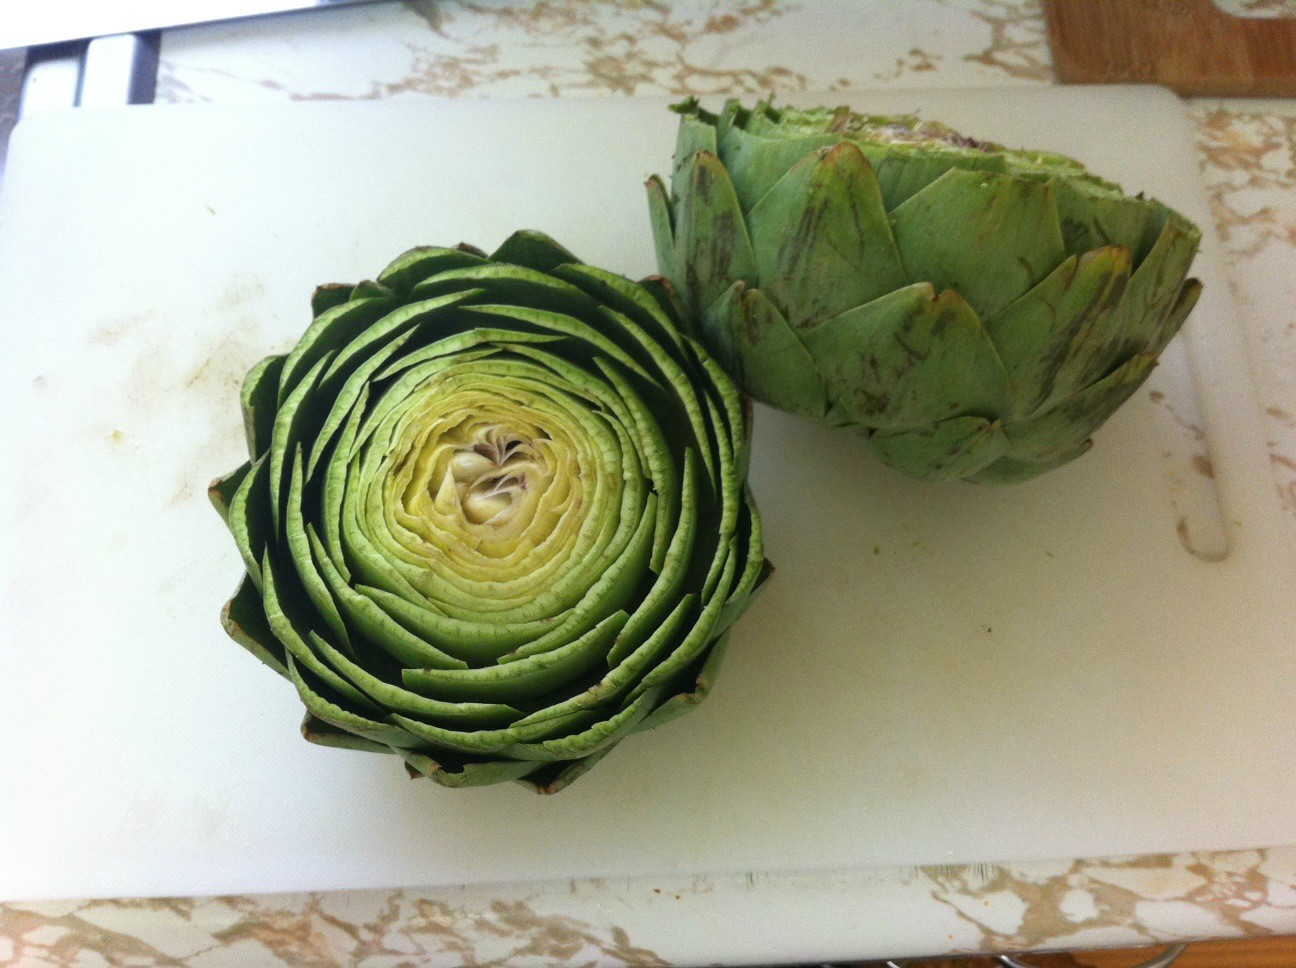 Trimmed artichokes - top and side view